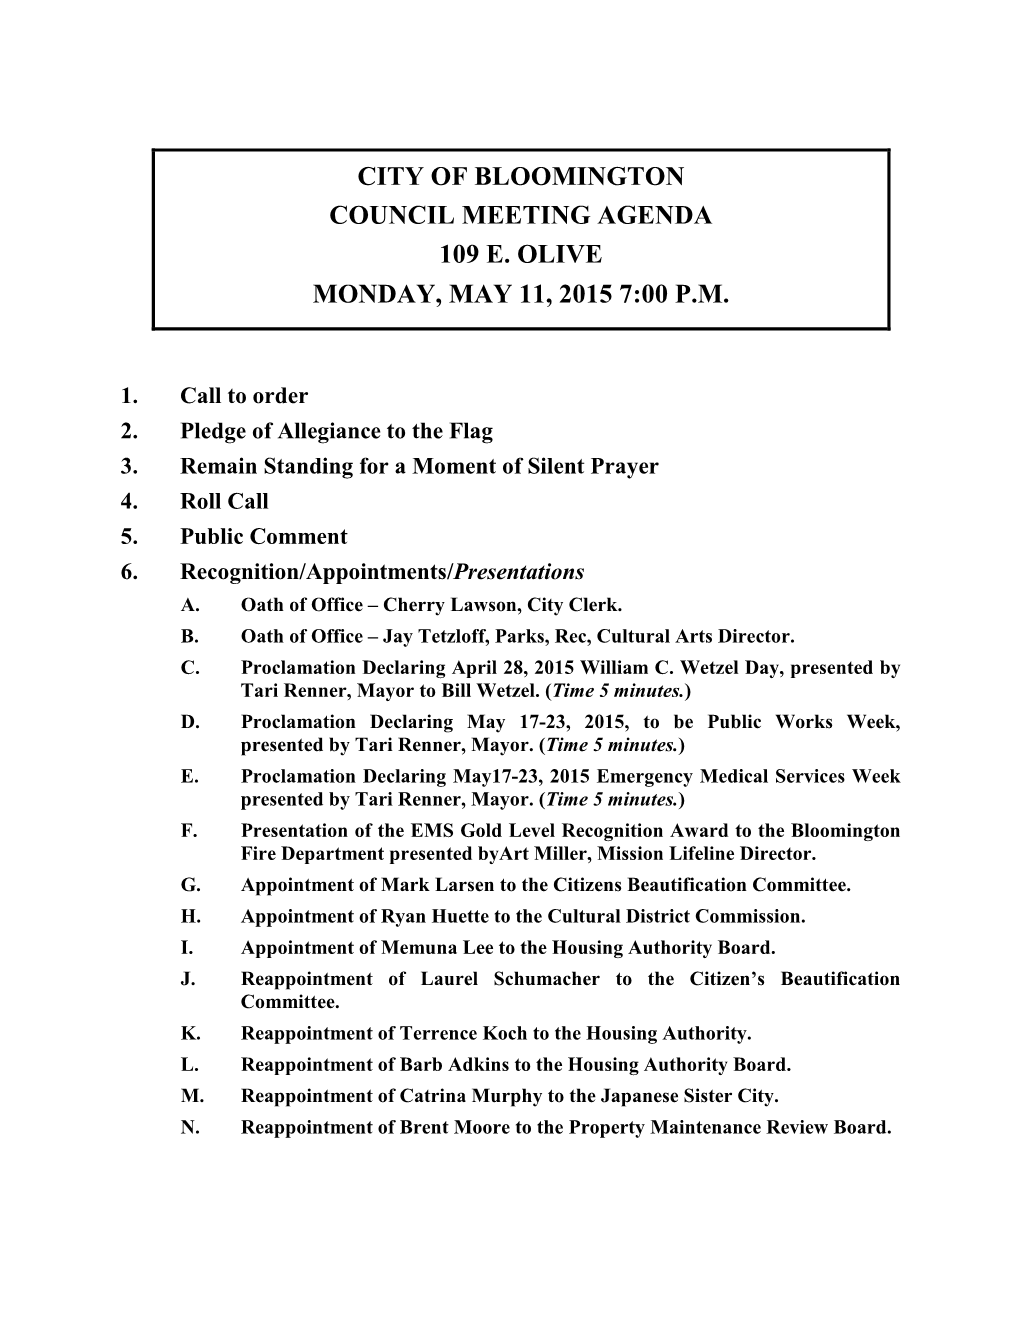 City of Bloomington Council Meeting Agenda 109 E. Olive Monday, May 11, 2015 7:00 P.M